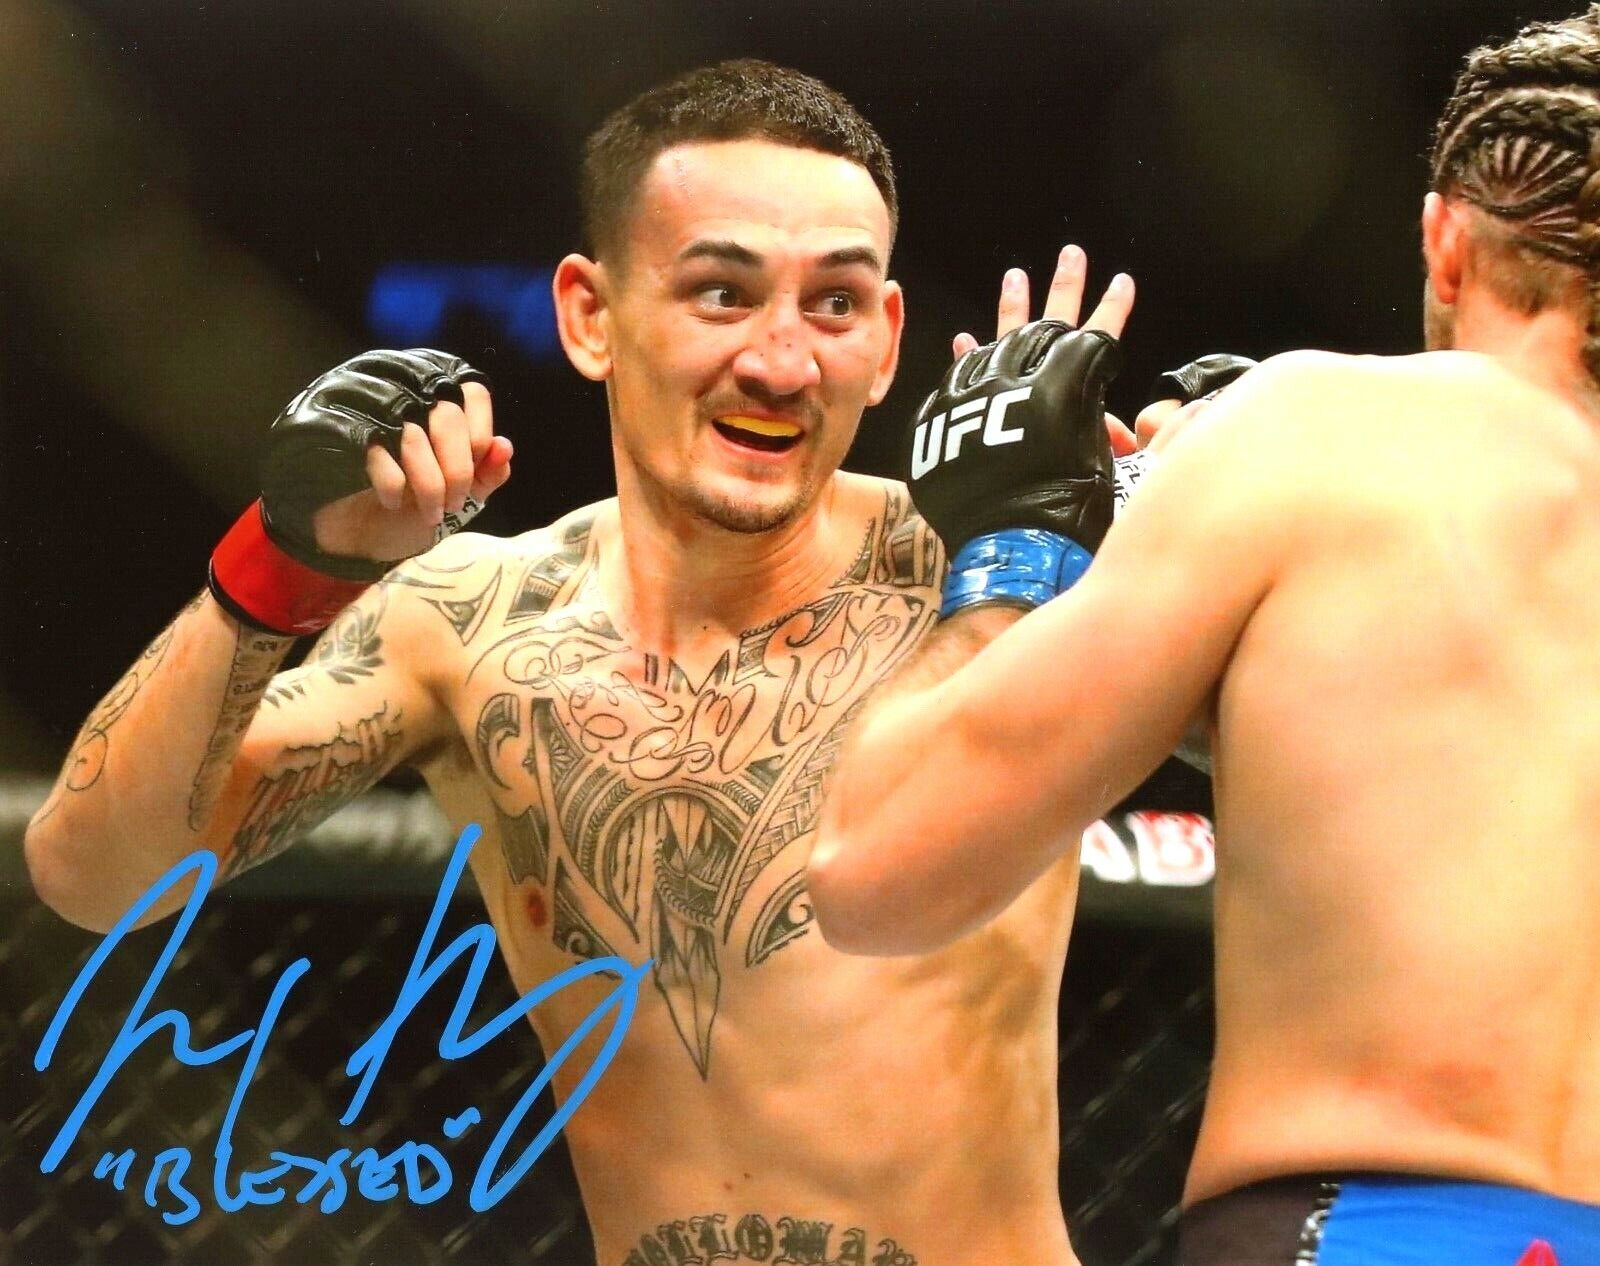 UFC MAX HOLLOWAY HAND SIGNED AUTOGRAPHED INSCRIBED 8X10 Photo Poster painting WITH PROOF & COA 6